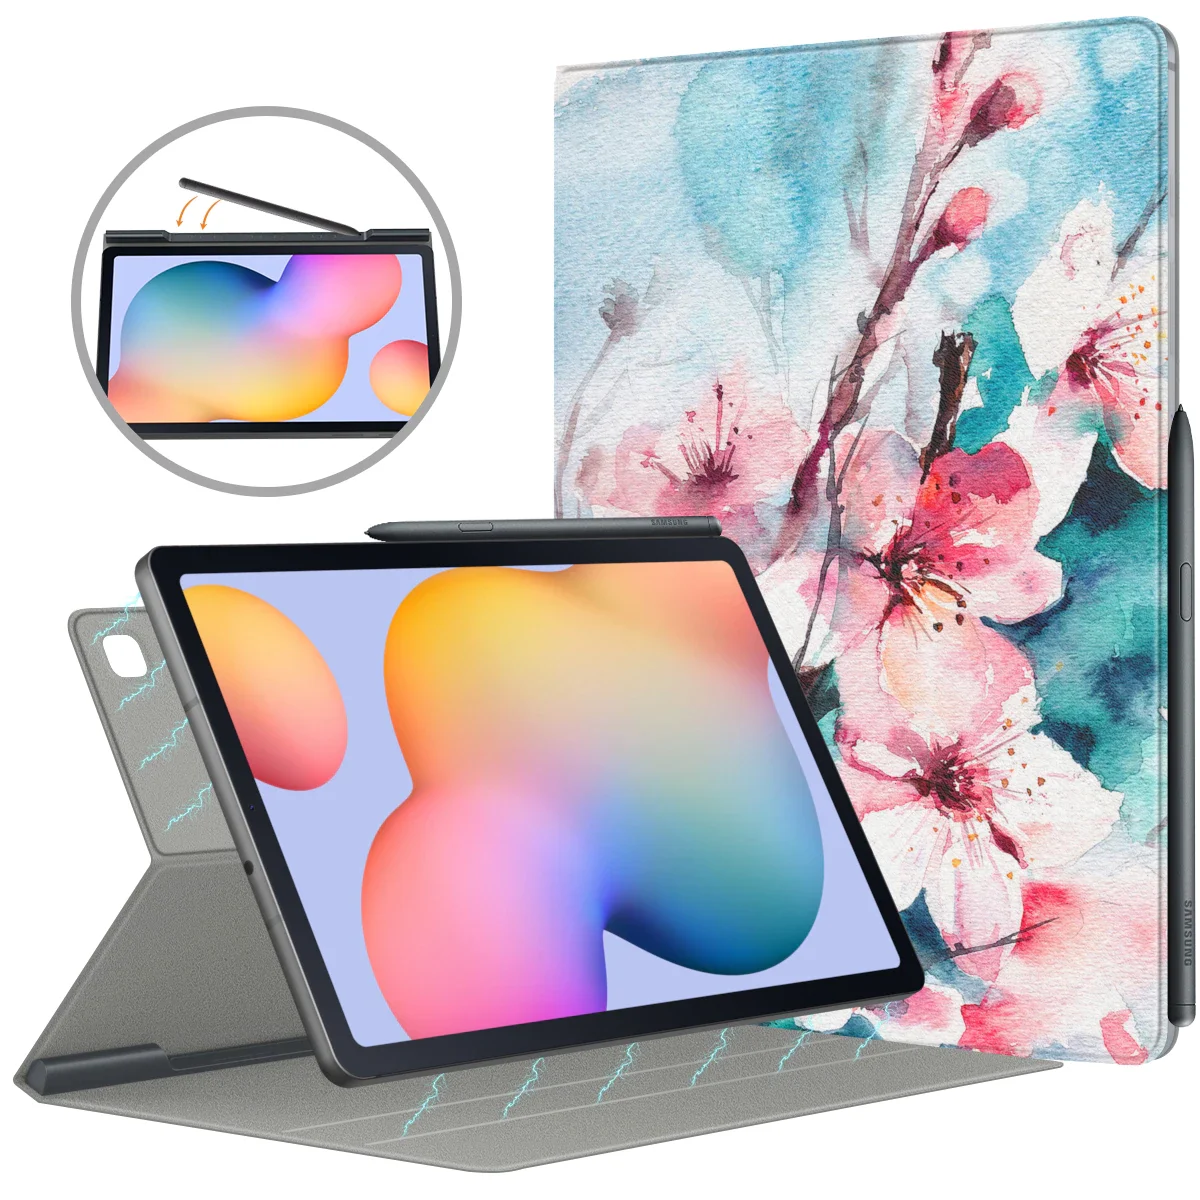 

New Tablets Case For New Samsung Galaxy Tab S6 Lite 10.4 Inch 2020 SM-P610/P615 Ultra Slim Lightweight Magnetic Stand Cover